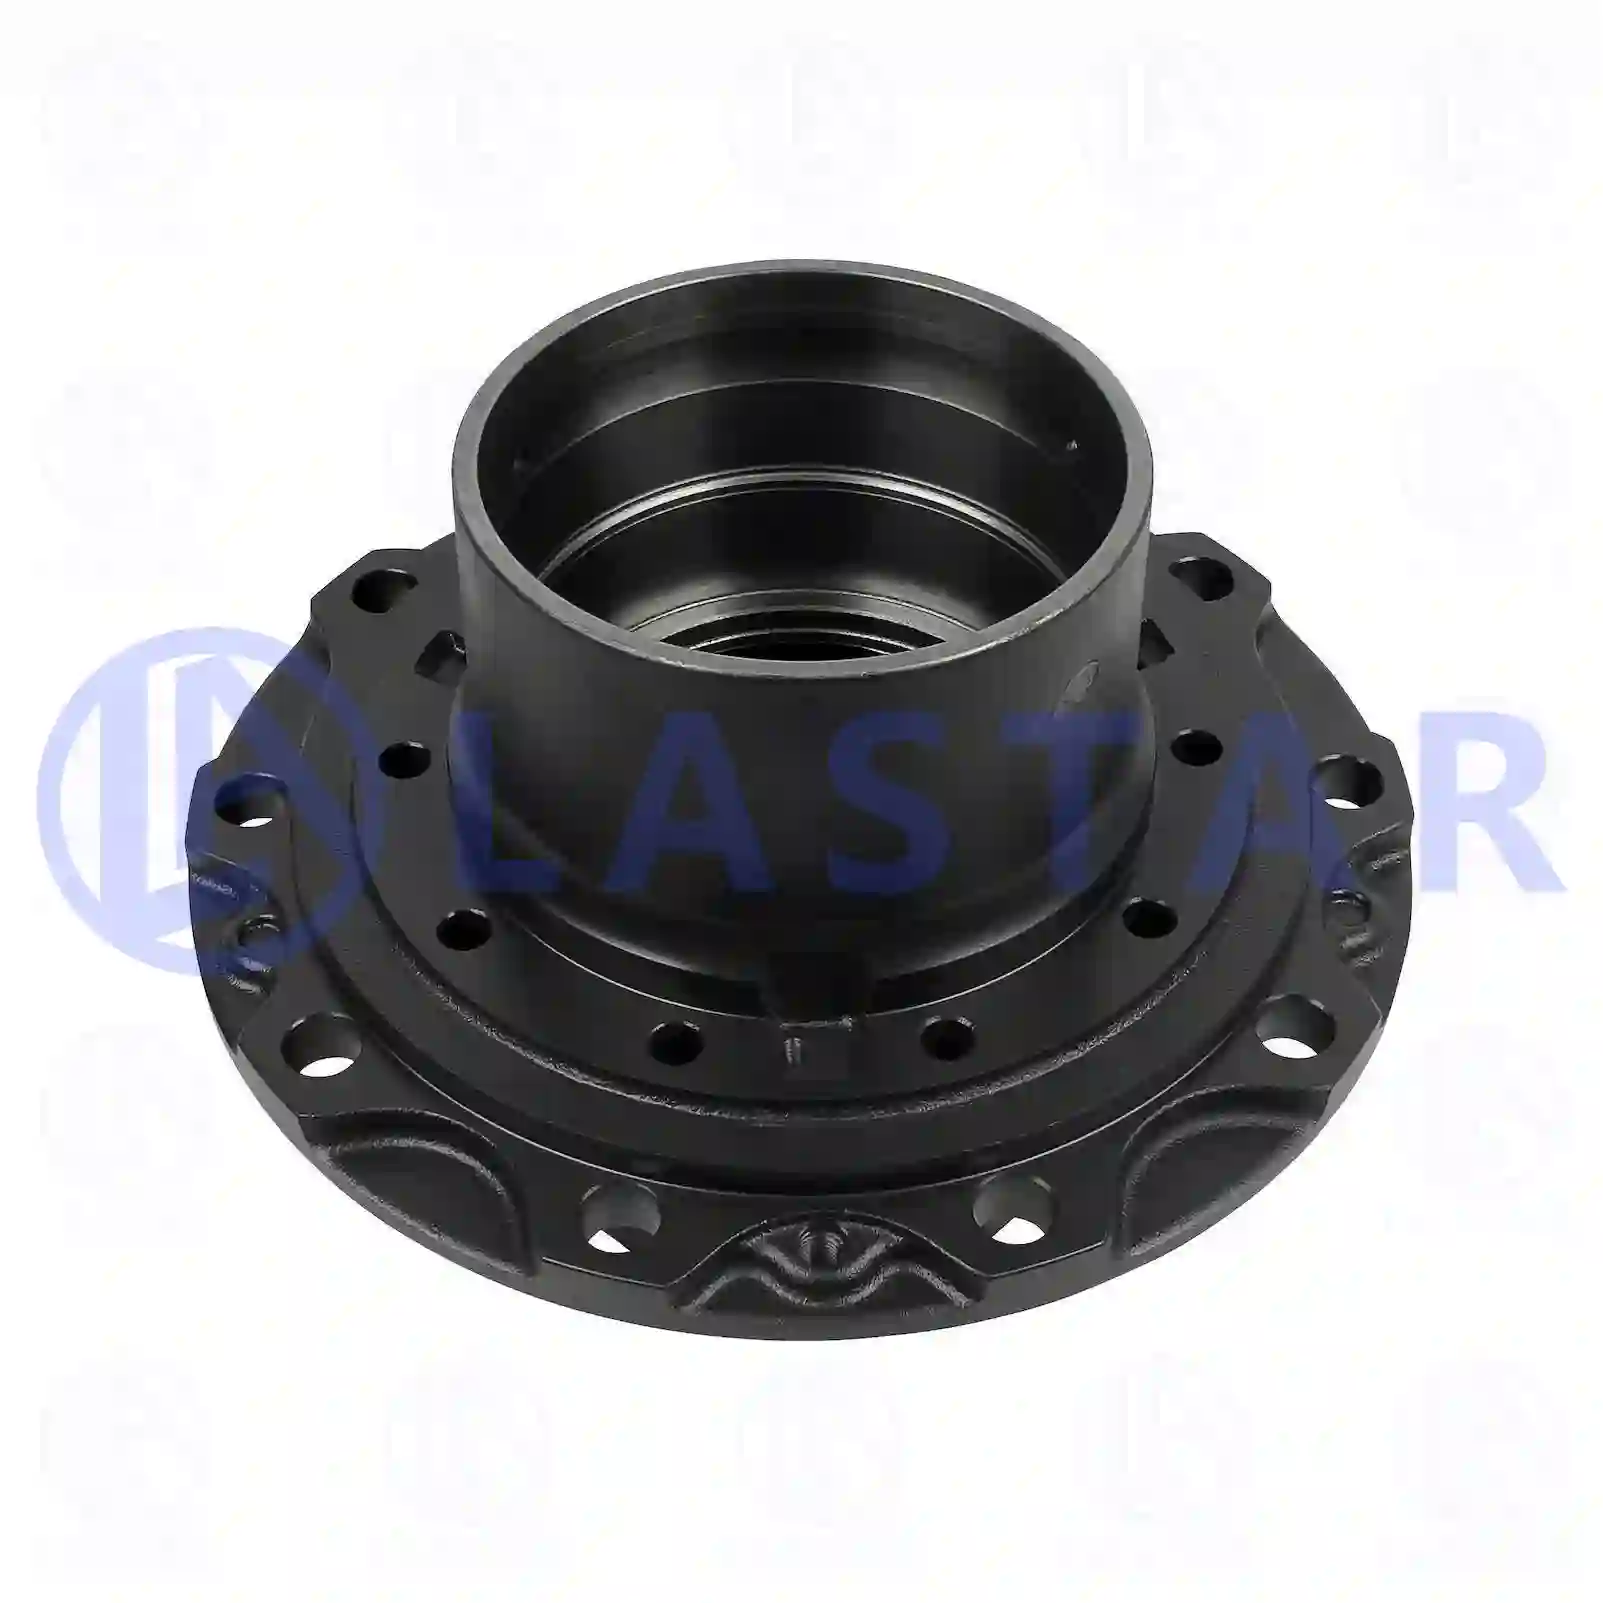 Wheel hub, without bearings, 77726342, 9423560901, ZG30230-0008, , , , , ||  77726342 Lastar Spare Part | Truck Spare Parts, Auotomotive Spare Parts Wheel hub, without bearings, 77726342, 9423560901, ZG30230-0008, , , , , ||  77726342 Lastar Spare Part | Truck Spare Parts, Auotomotive Spare Parts